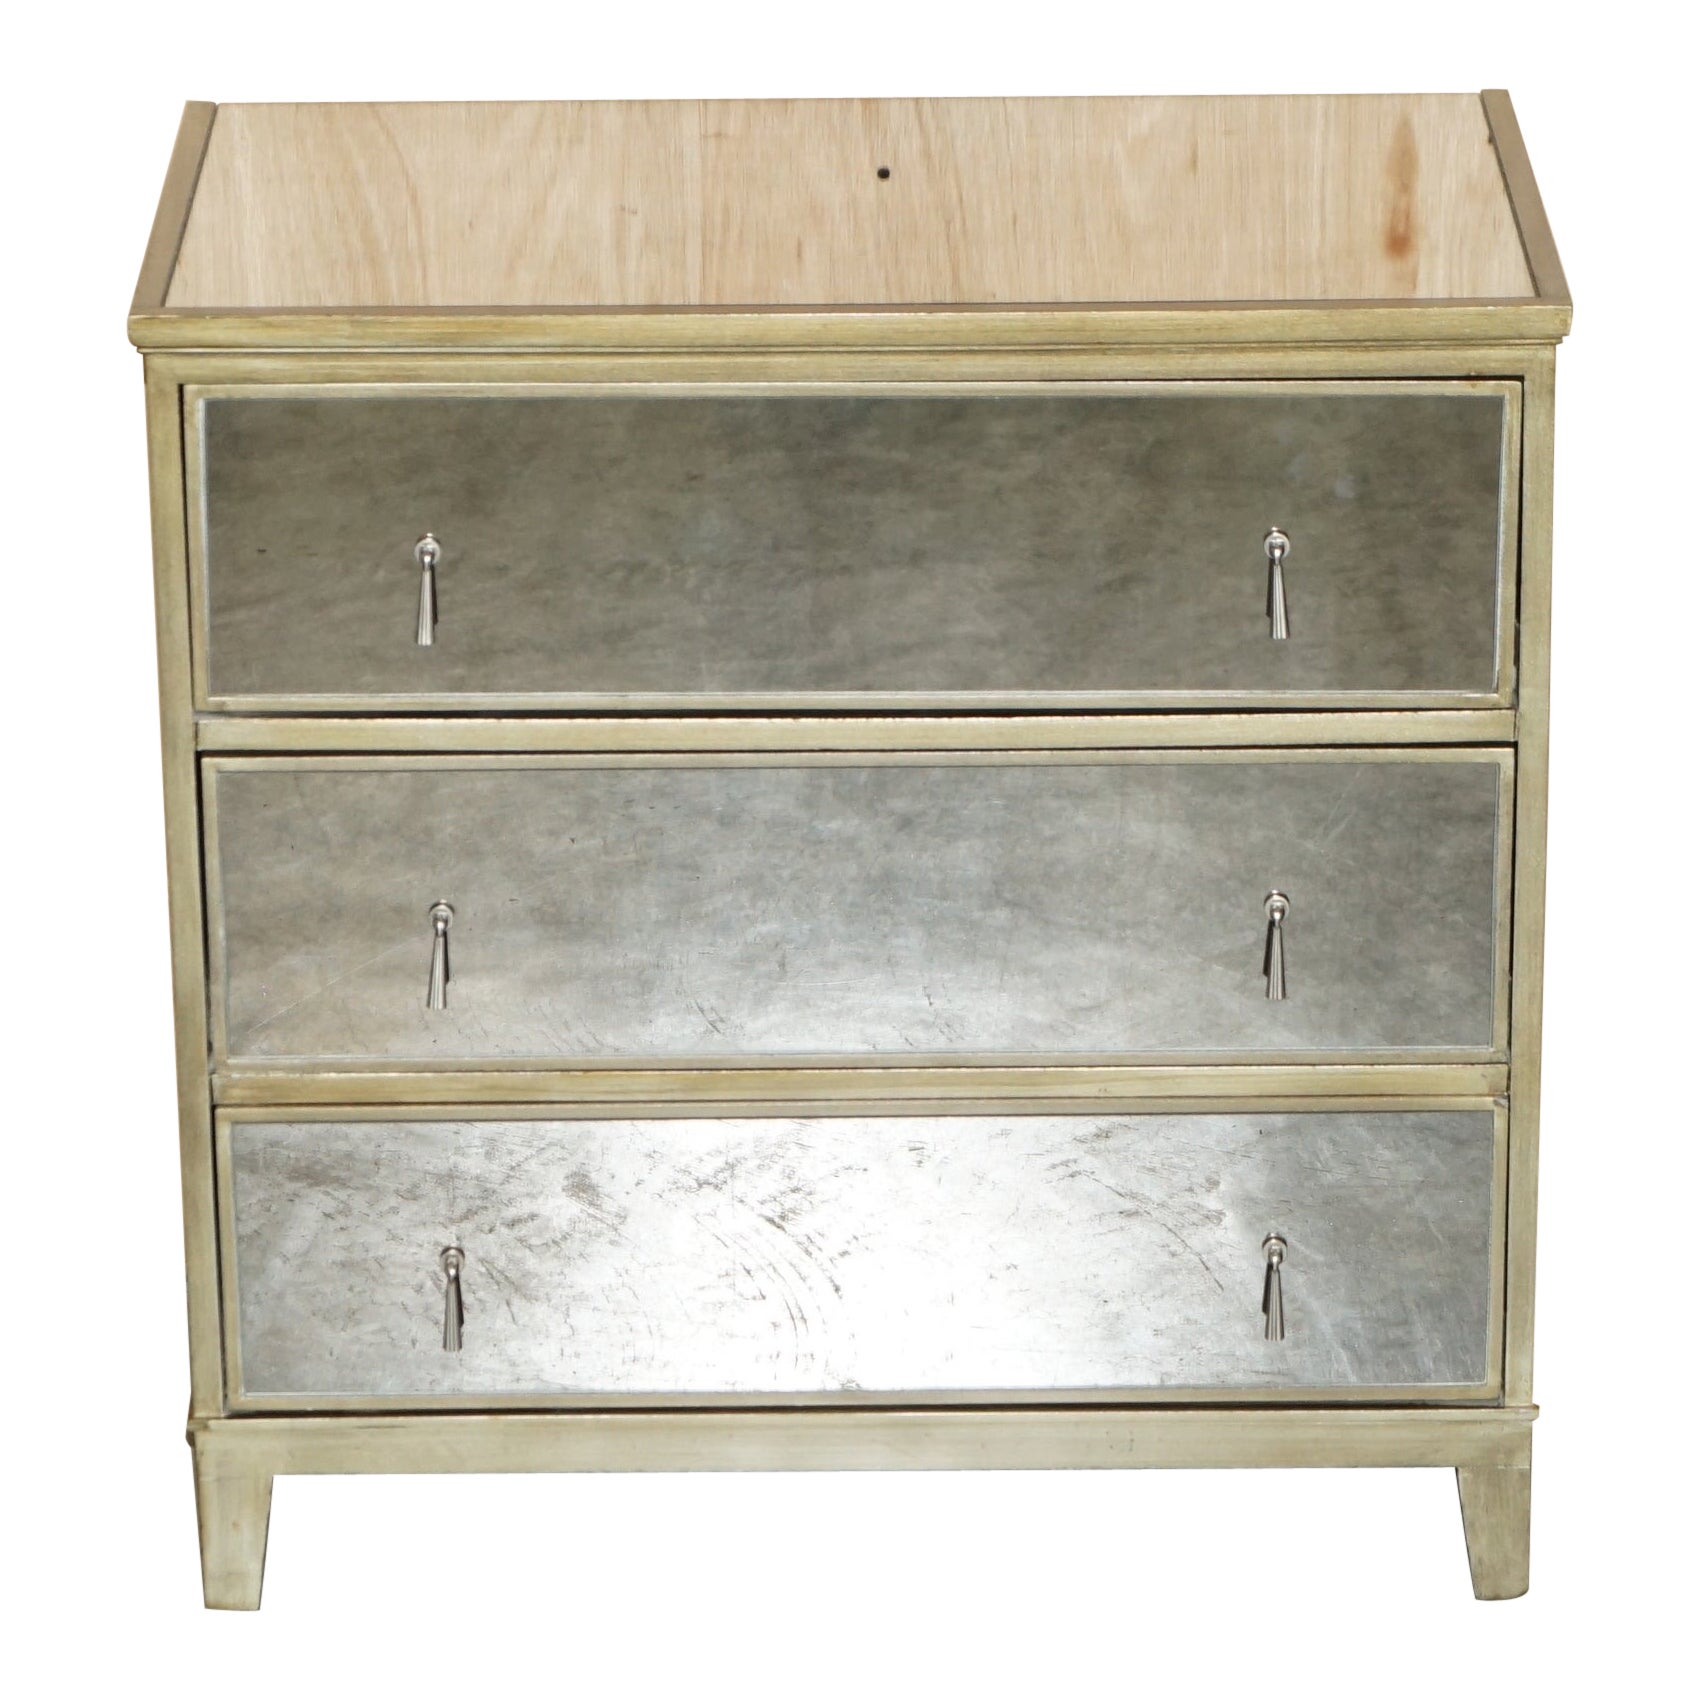 FEATHER & BLACK GATSBY MIRRORED CHEST OF DRAWERS MATCHING SiDE TABLES AVAILABLE